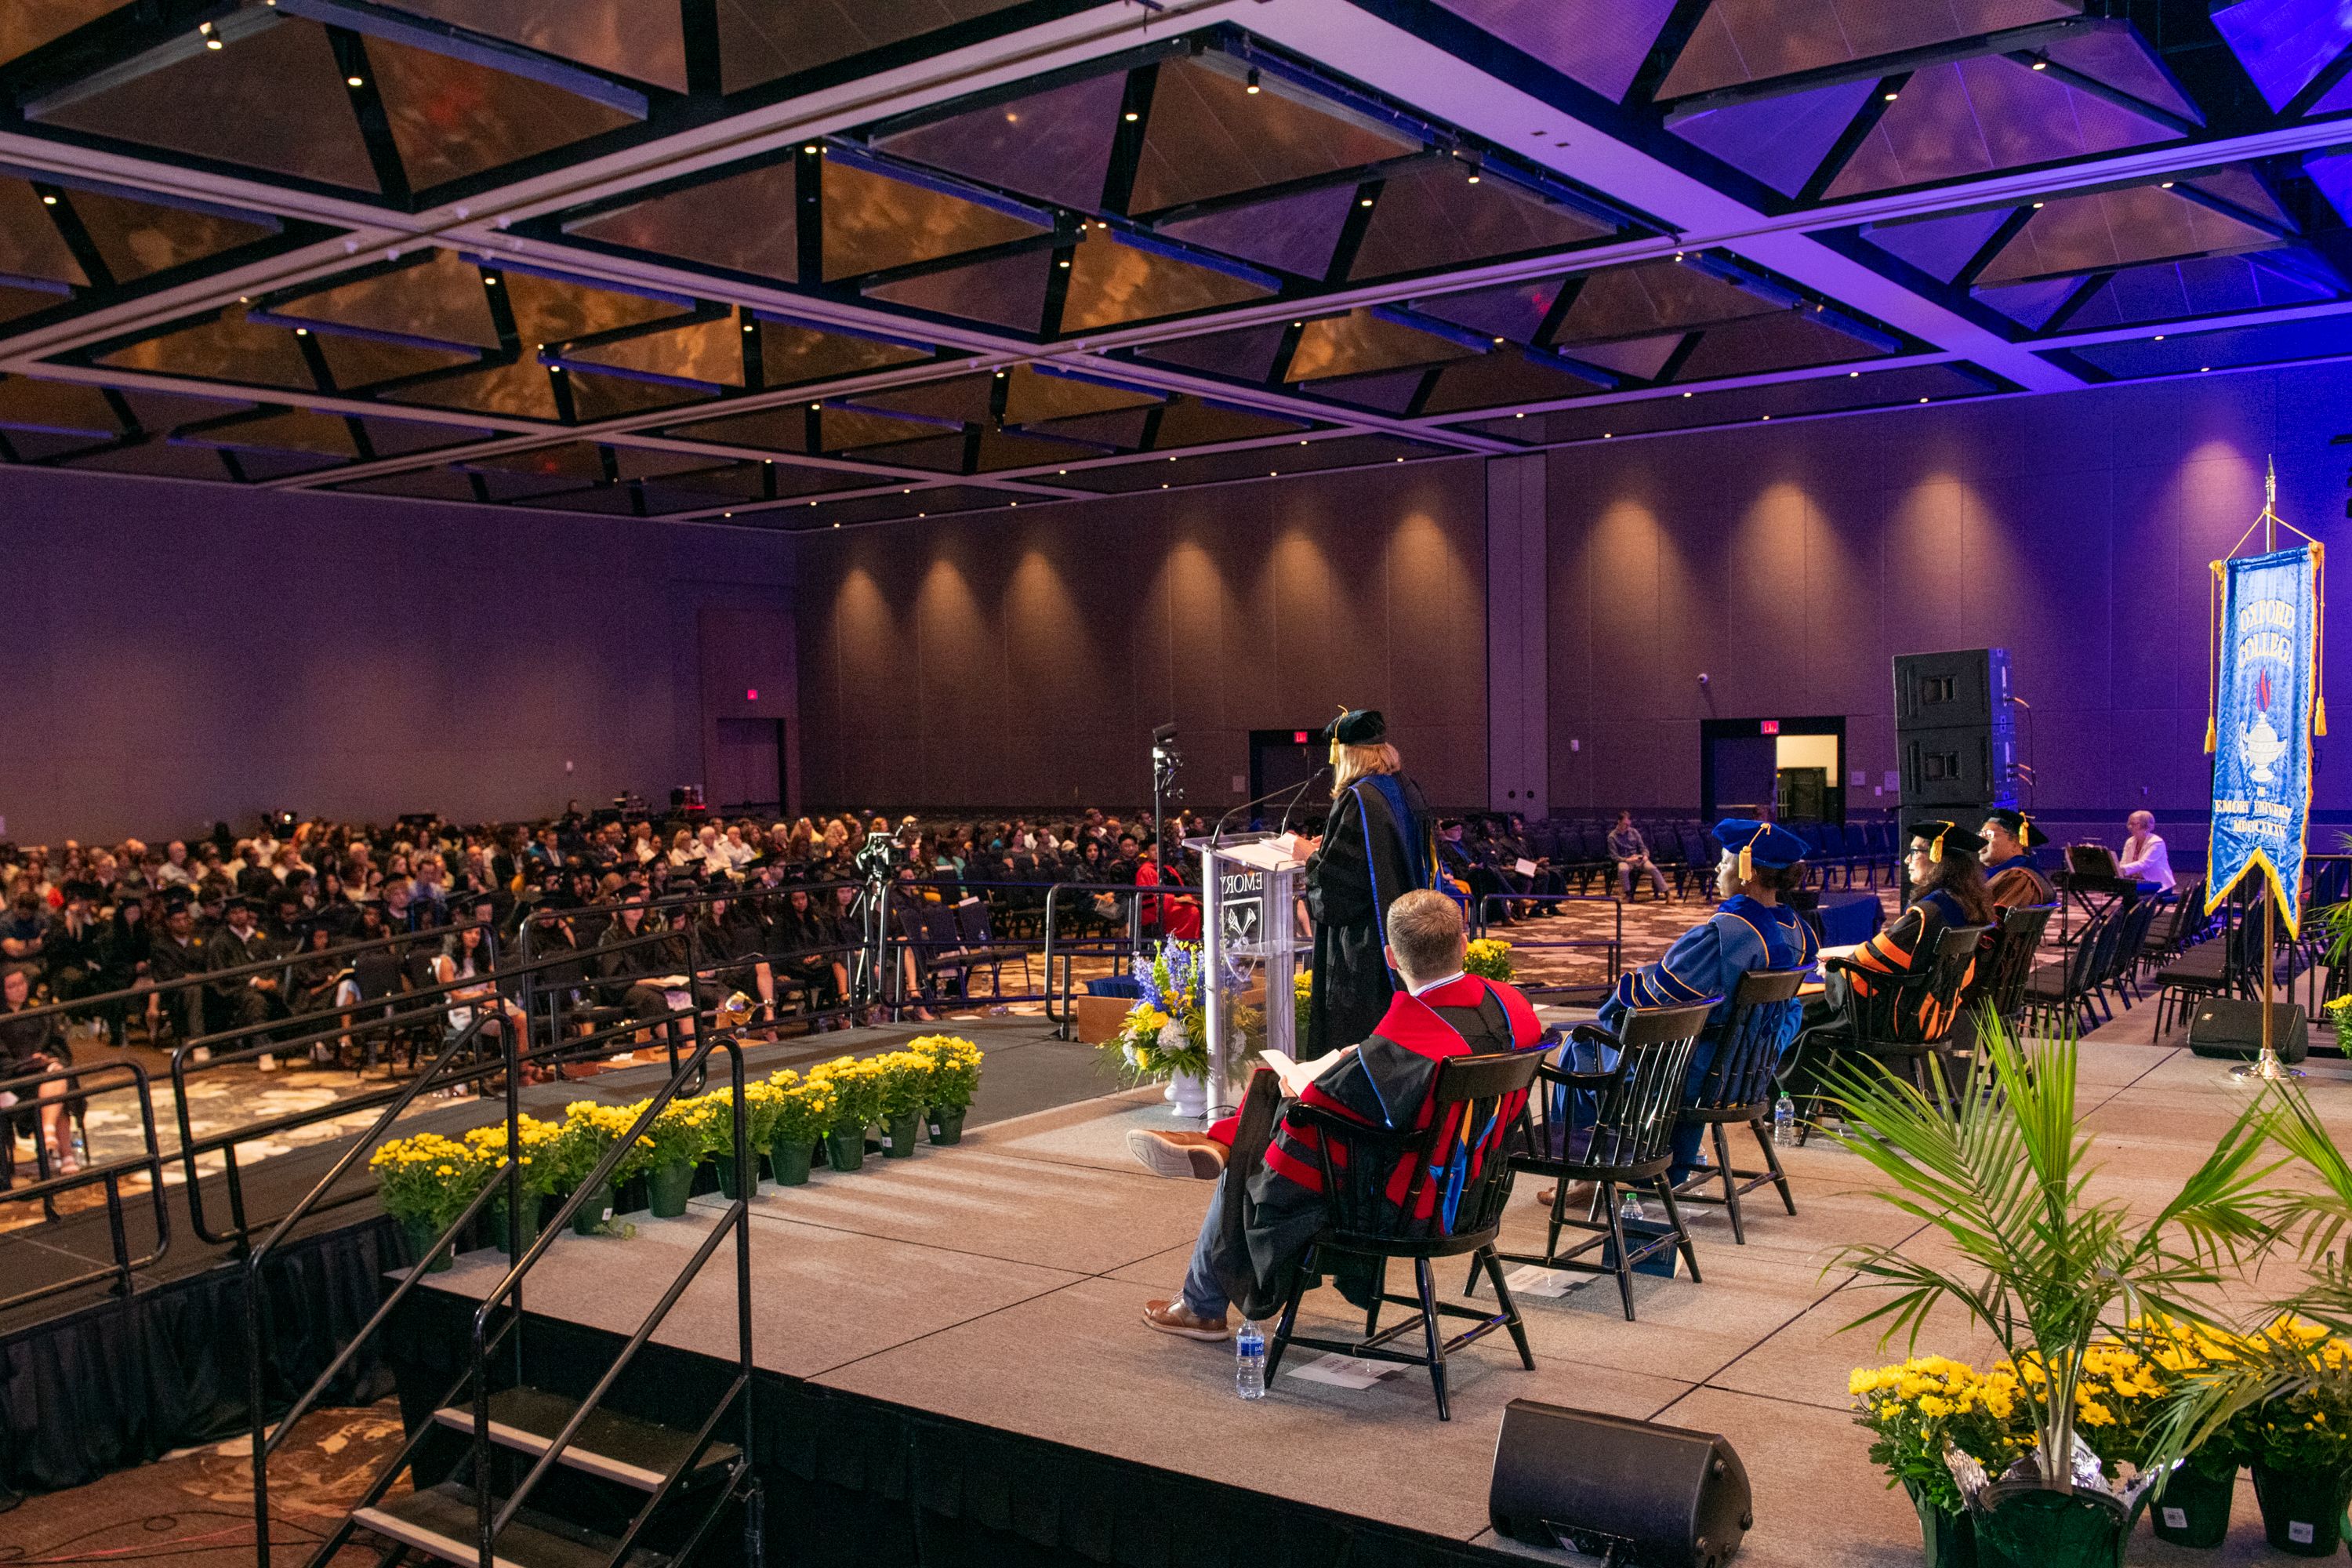 Students celebrating Commencement at the Gas South Convention Center in Duluth, Georgia.